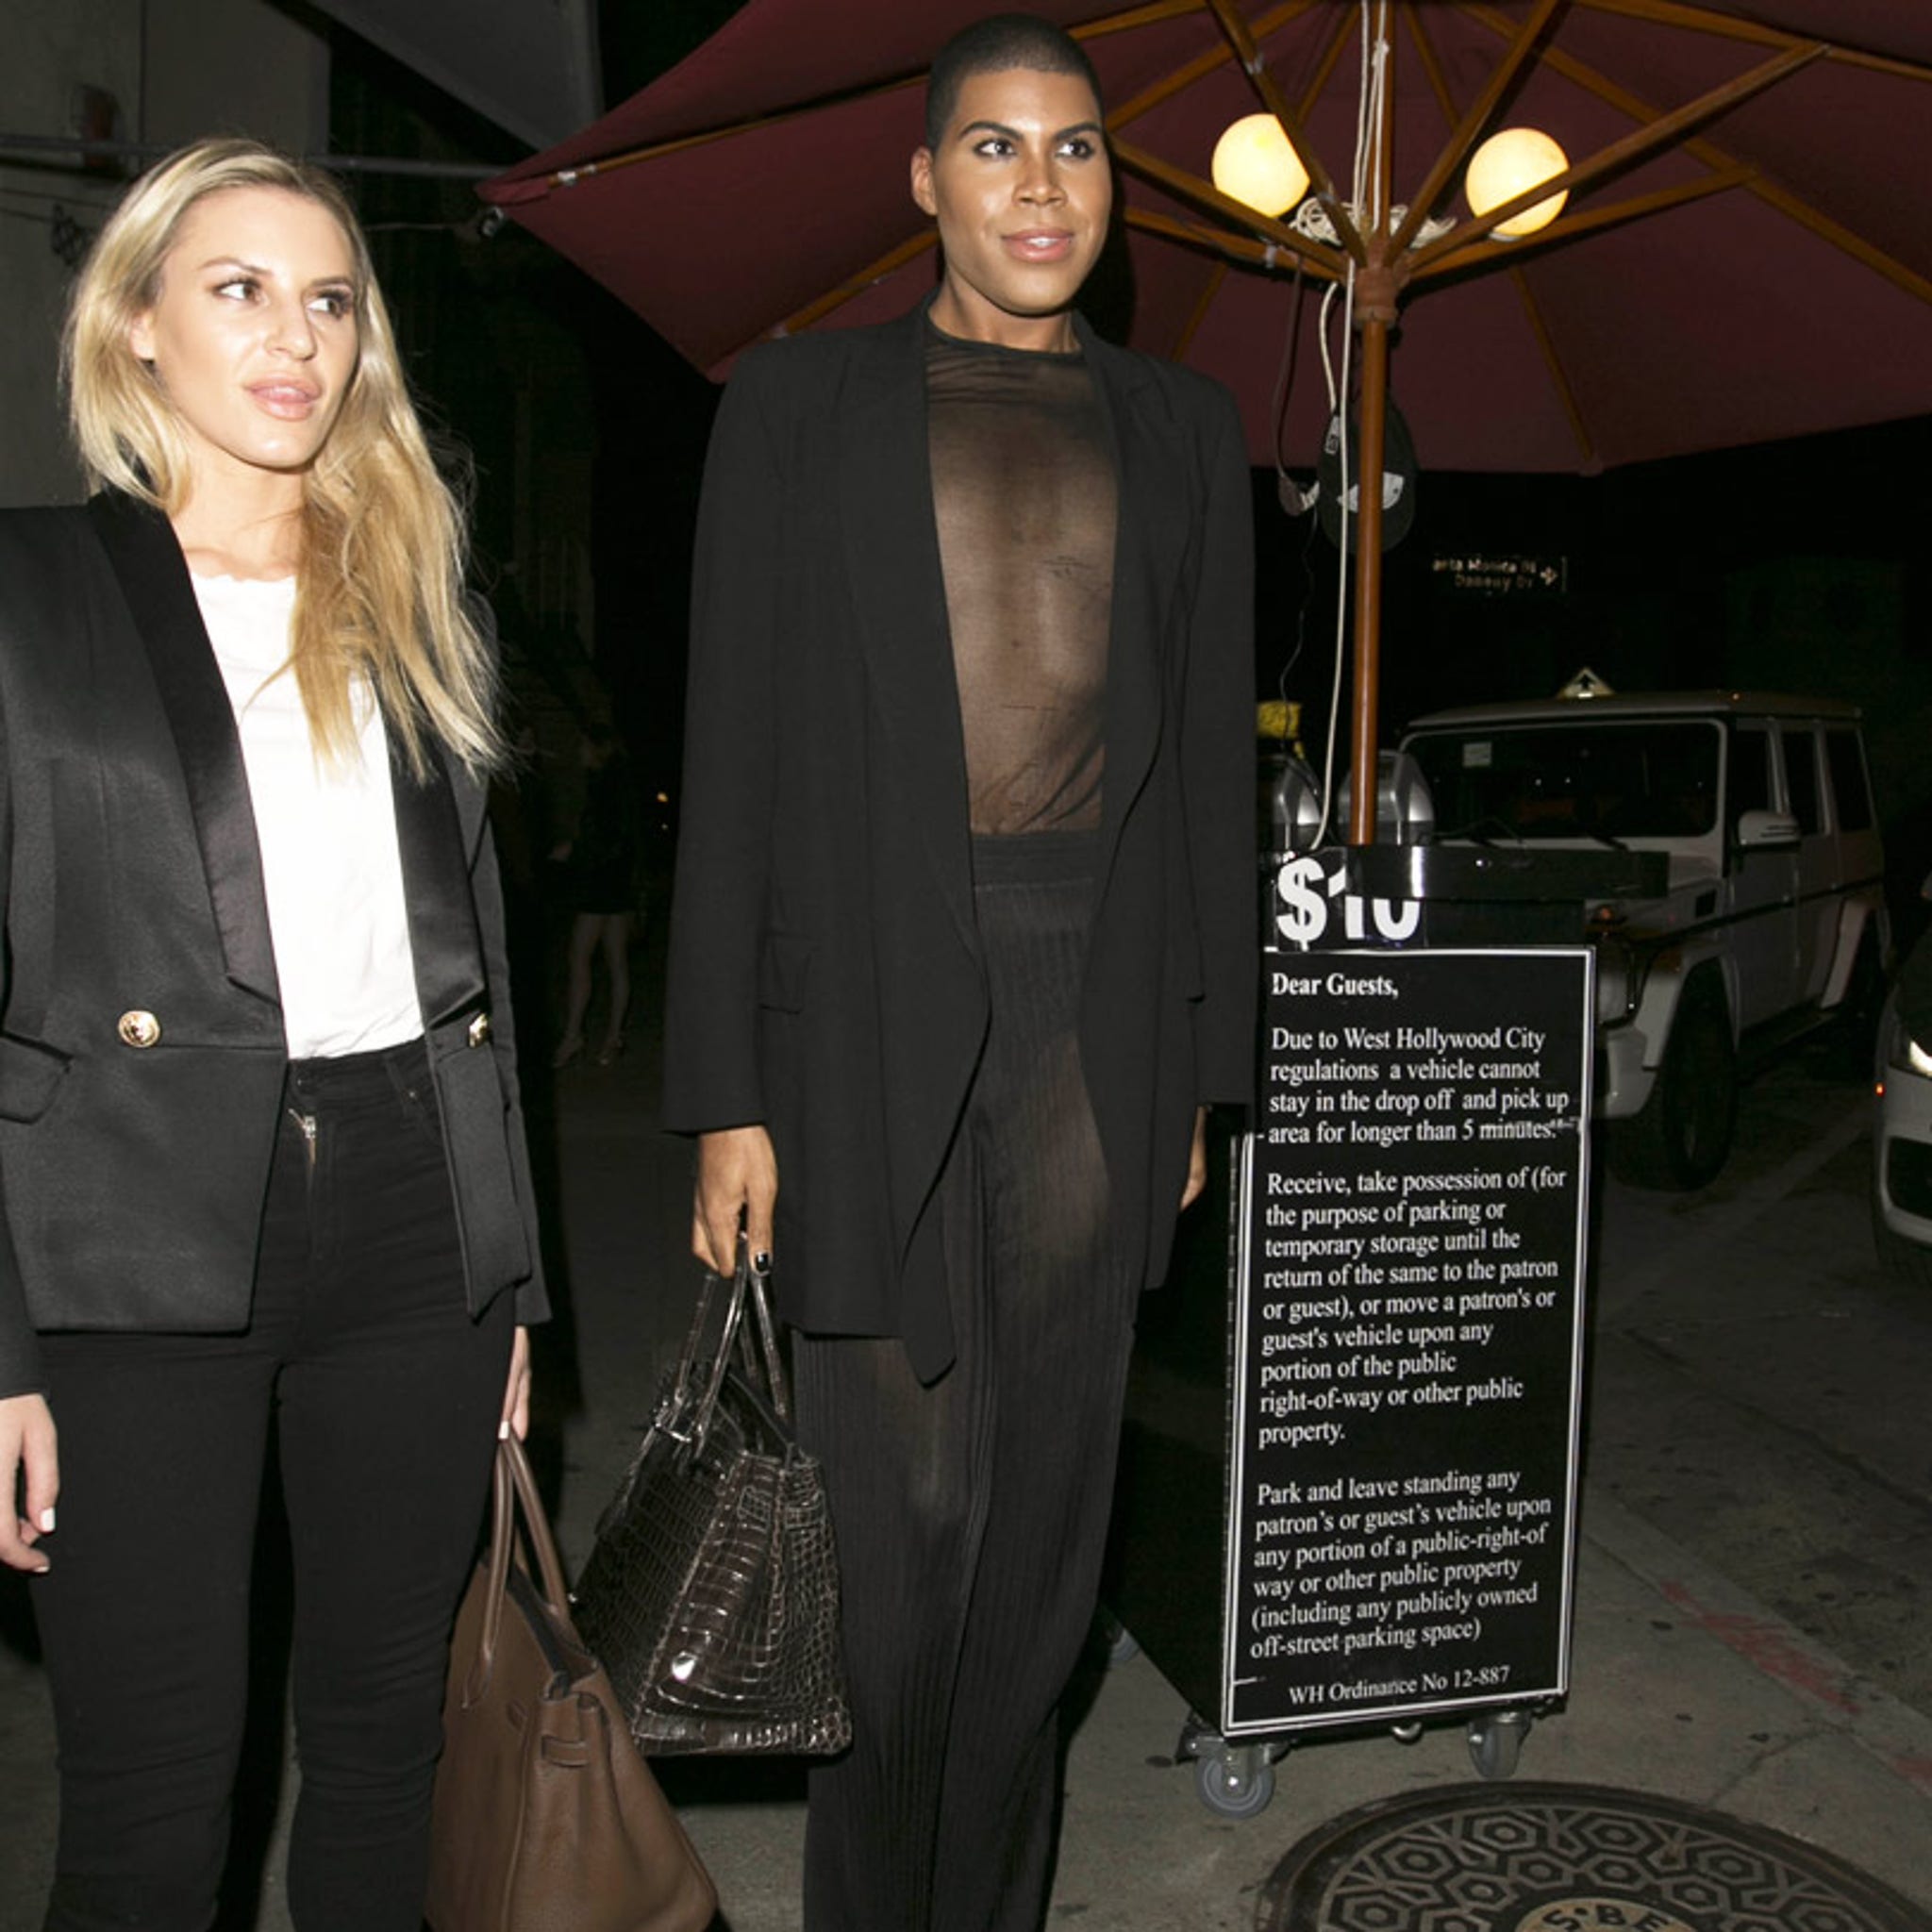 EJ Johnson Reveals He Had Gastric Bypass Surgery, News